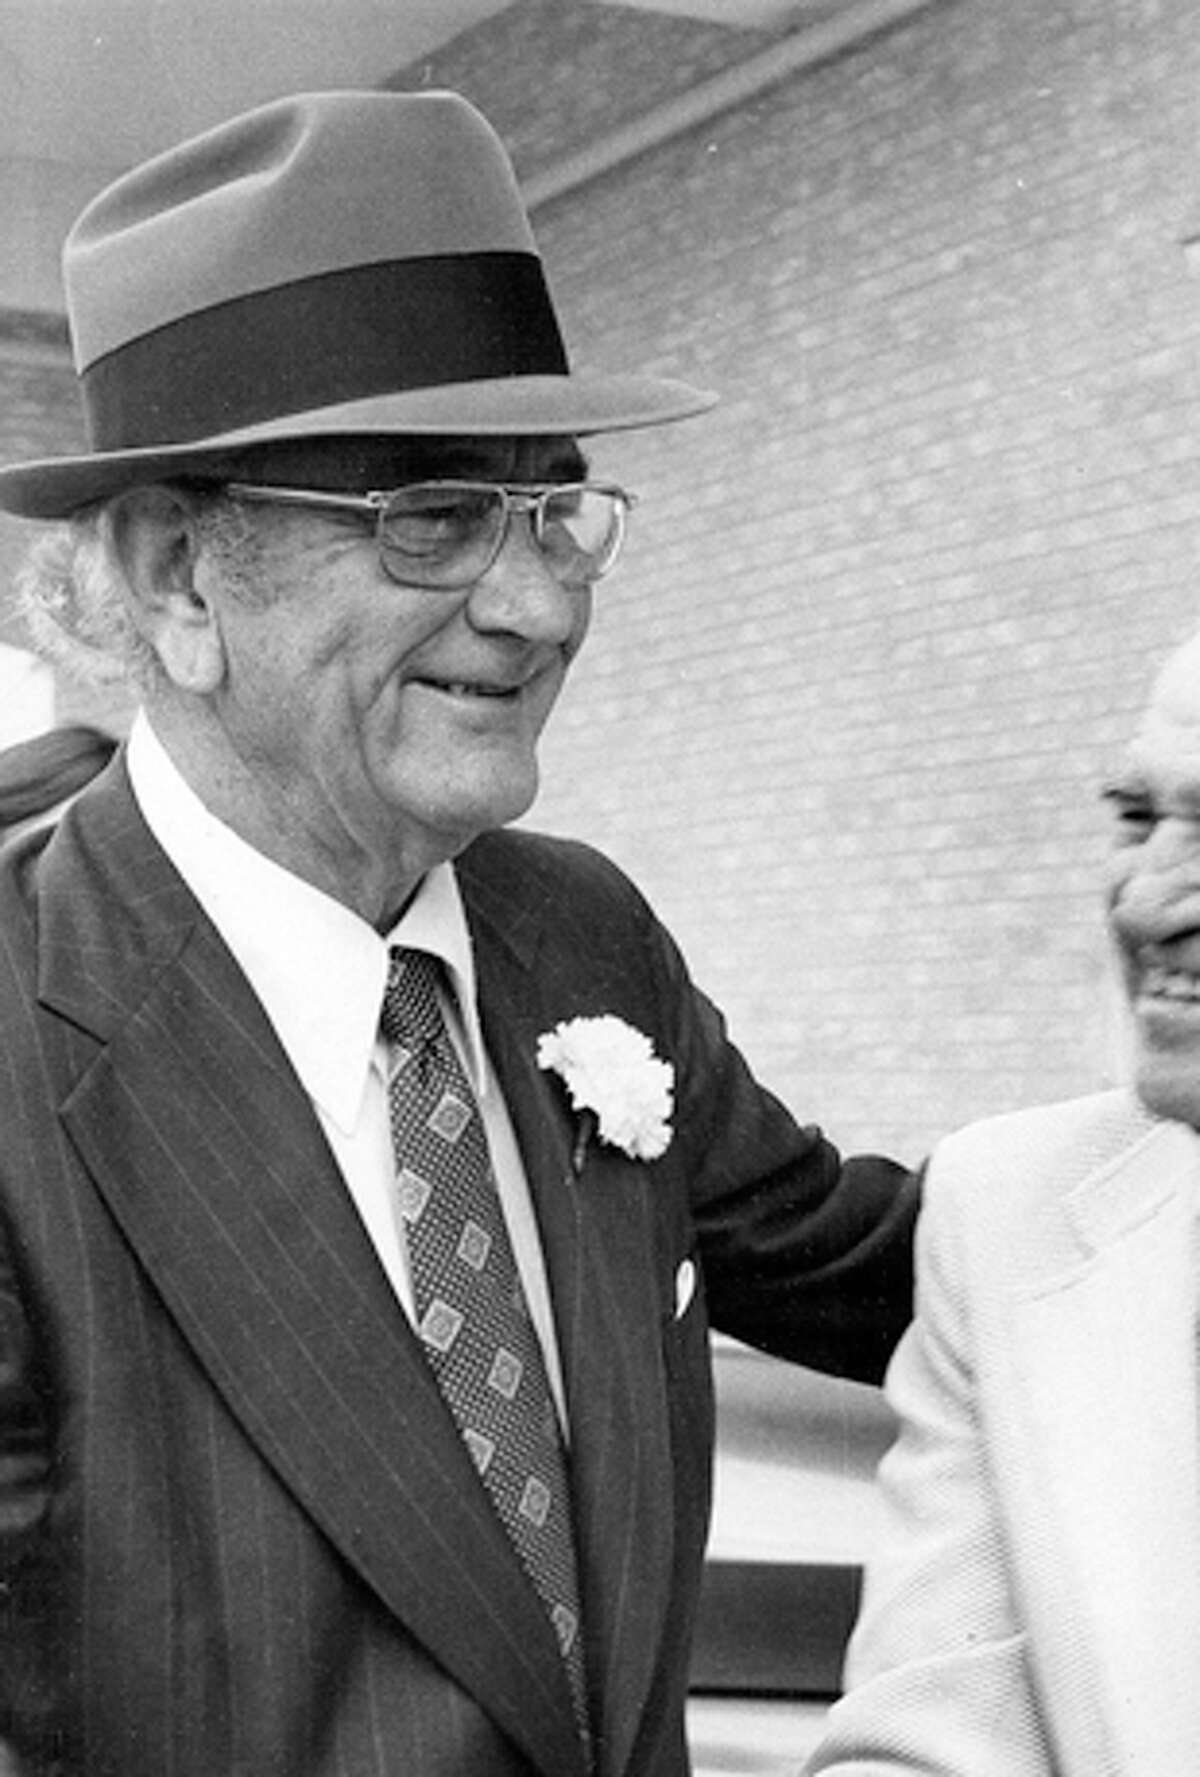 Lyndon Johnson visited San Antonio on January 16, 1973, less than a week before he died.